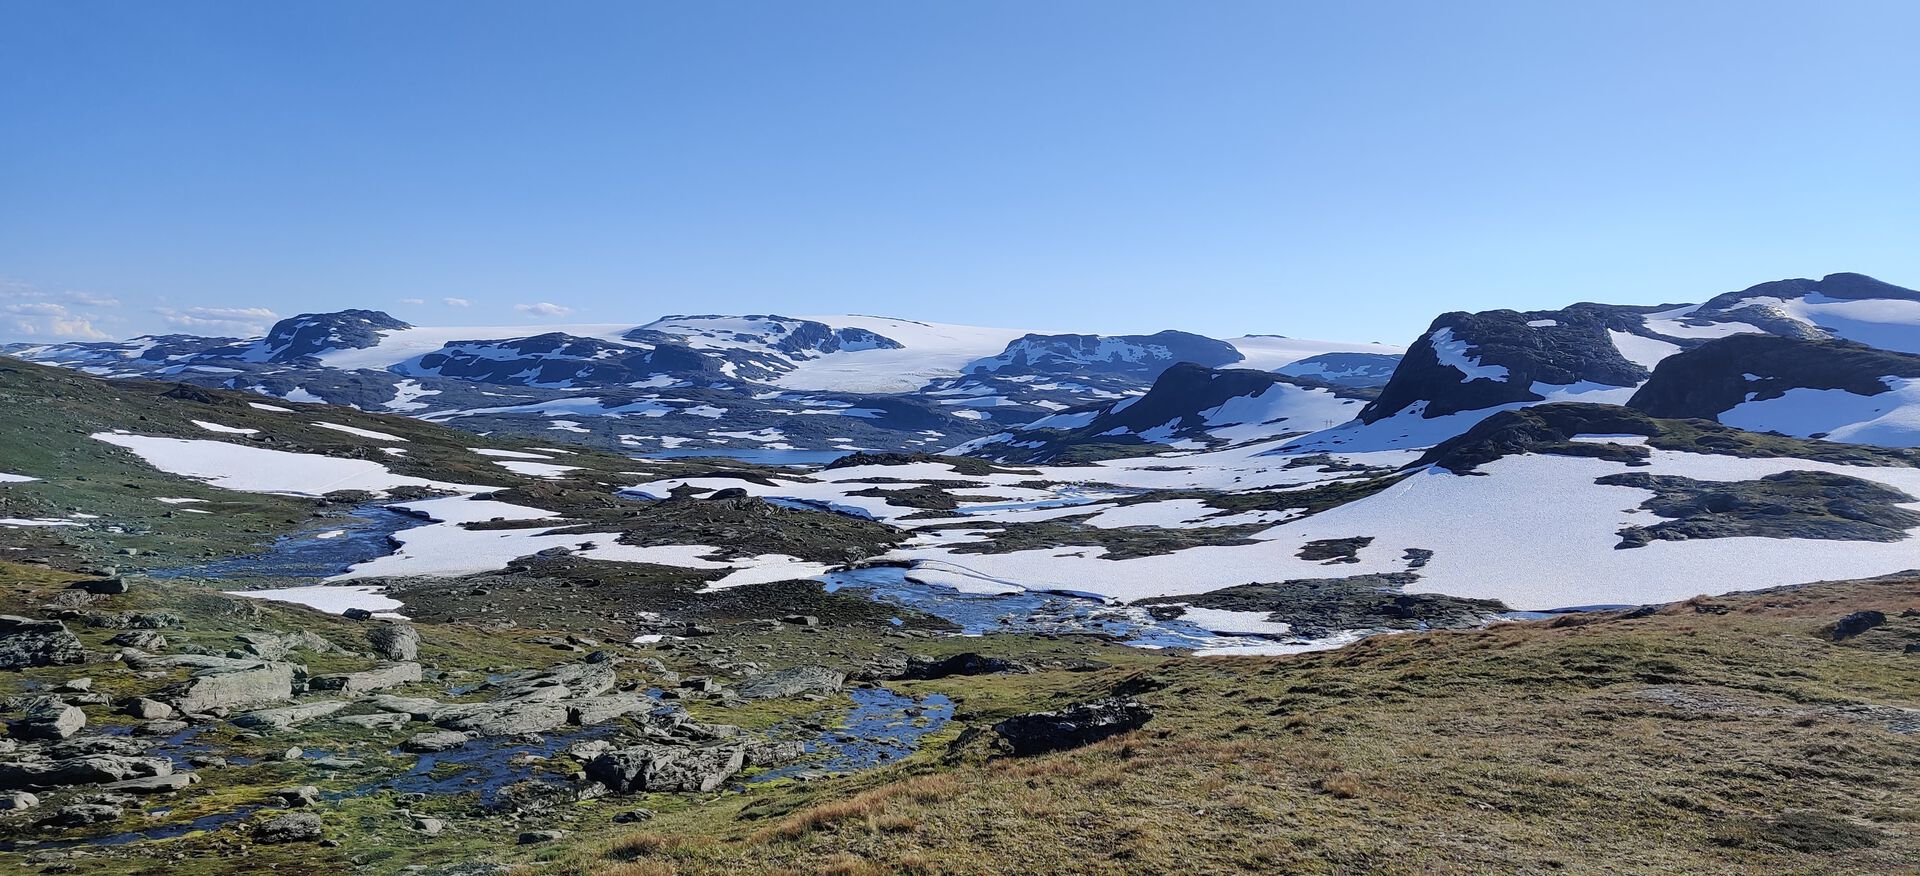 The field site to study the linkage between groundwater discharge and greenhouse gas evasion in Finse, Norway.